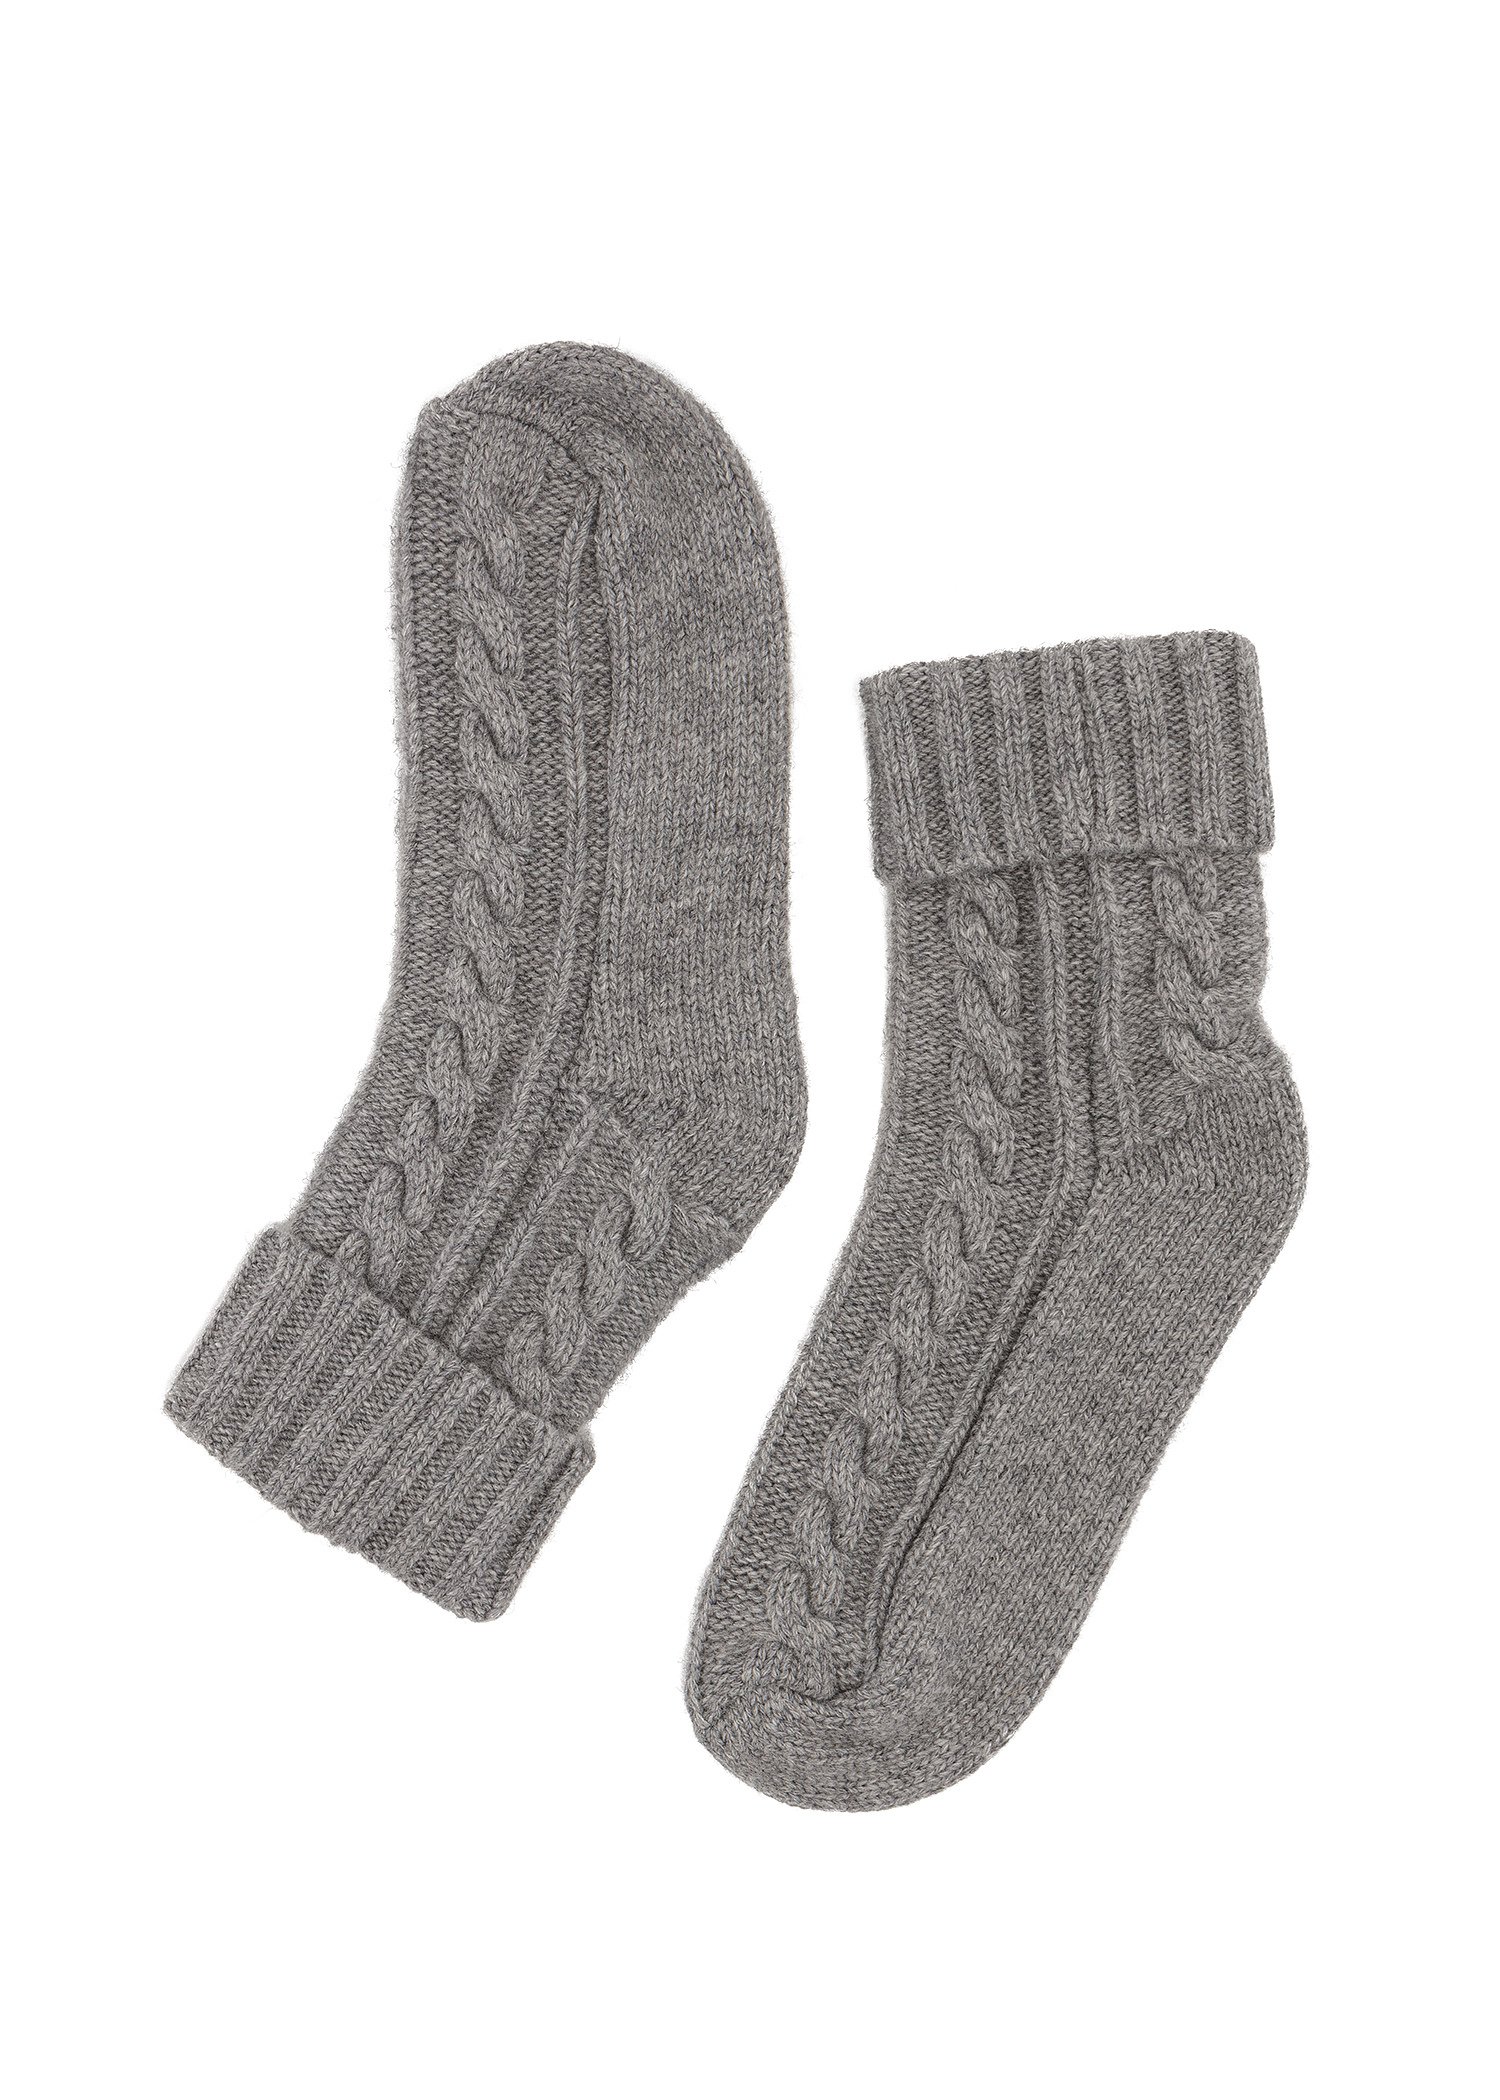 Cable knit socks